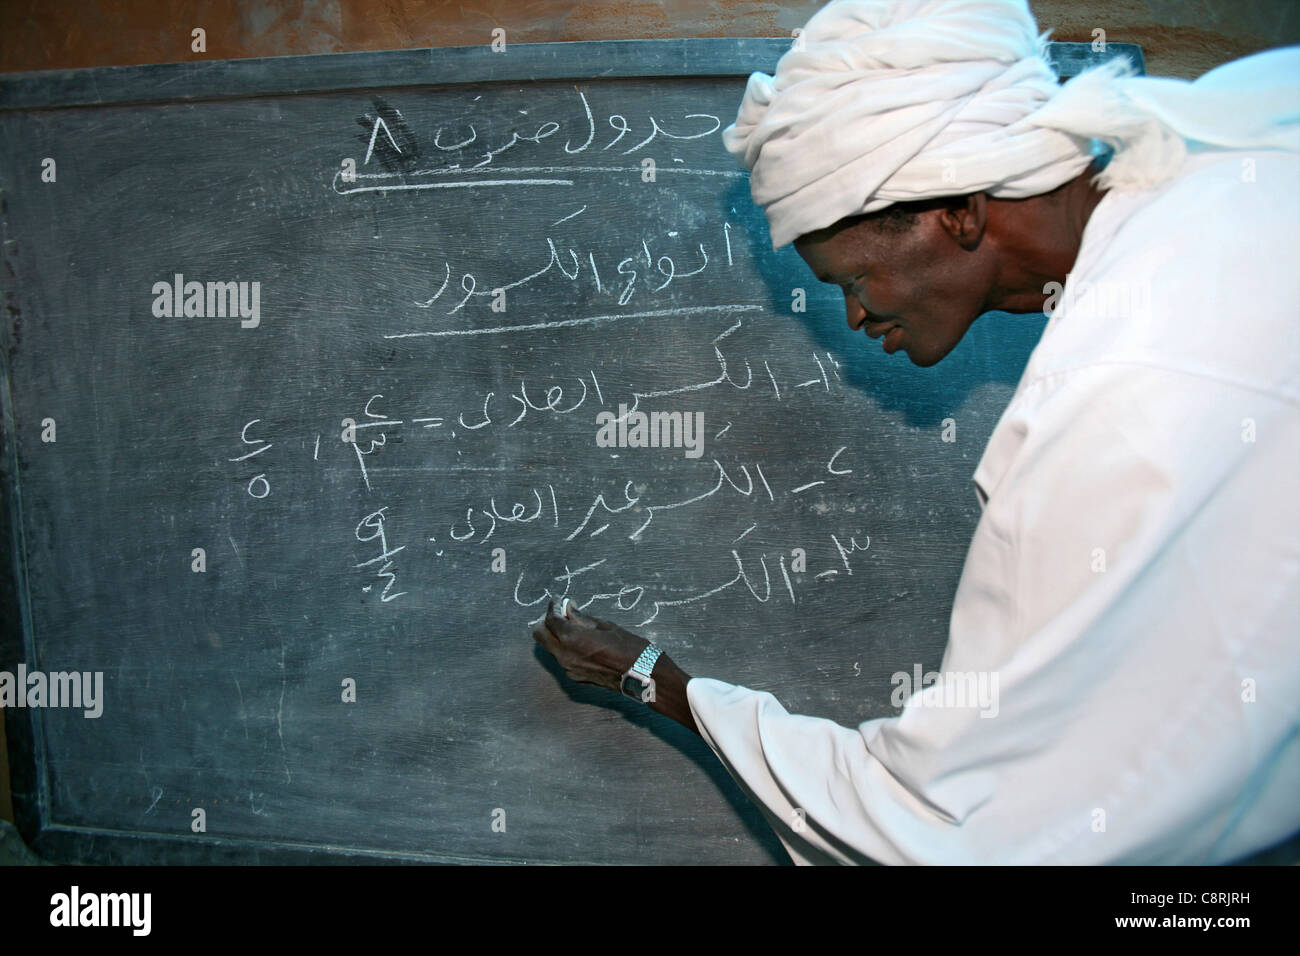 School in sudanese refugeecamp in Chad Stock Photo